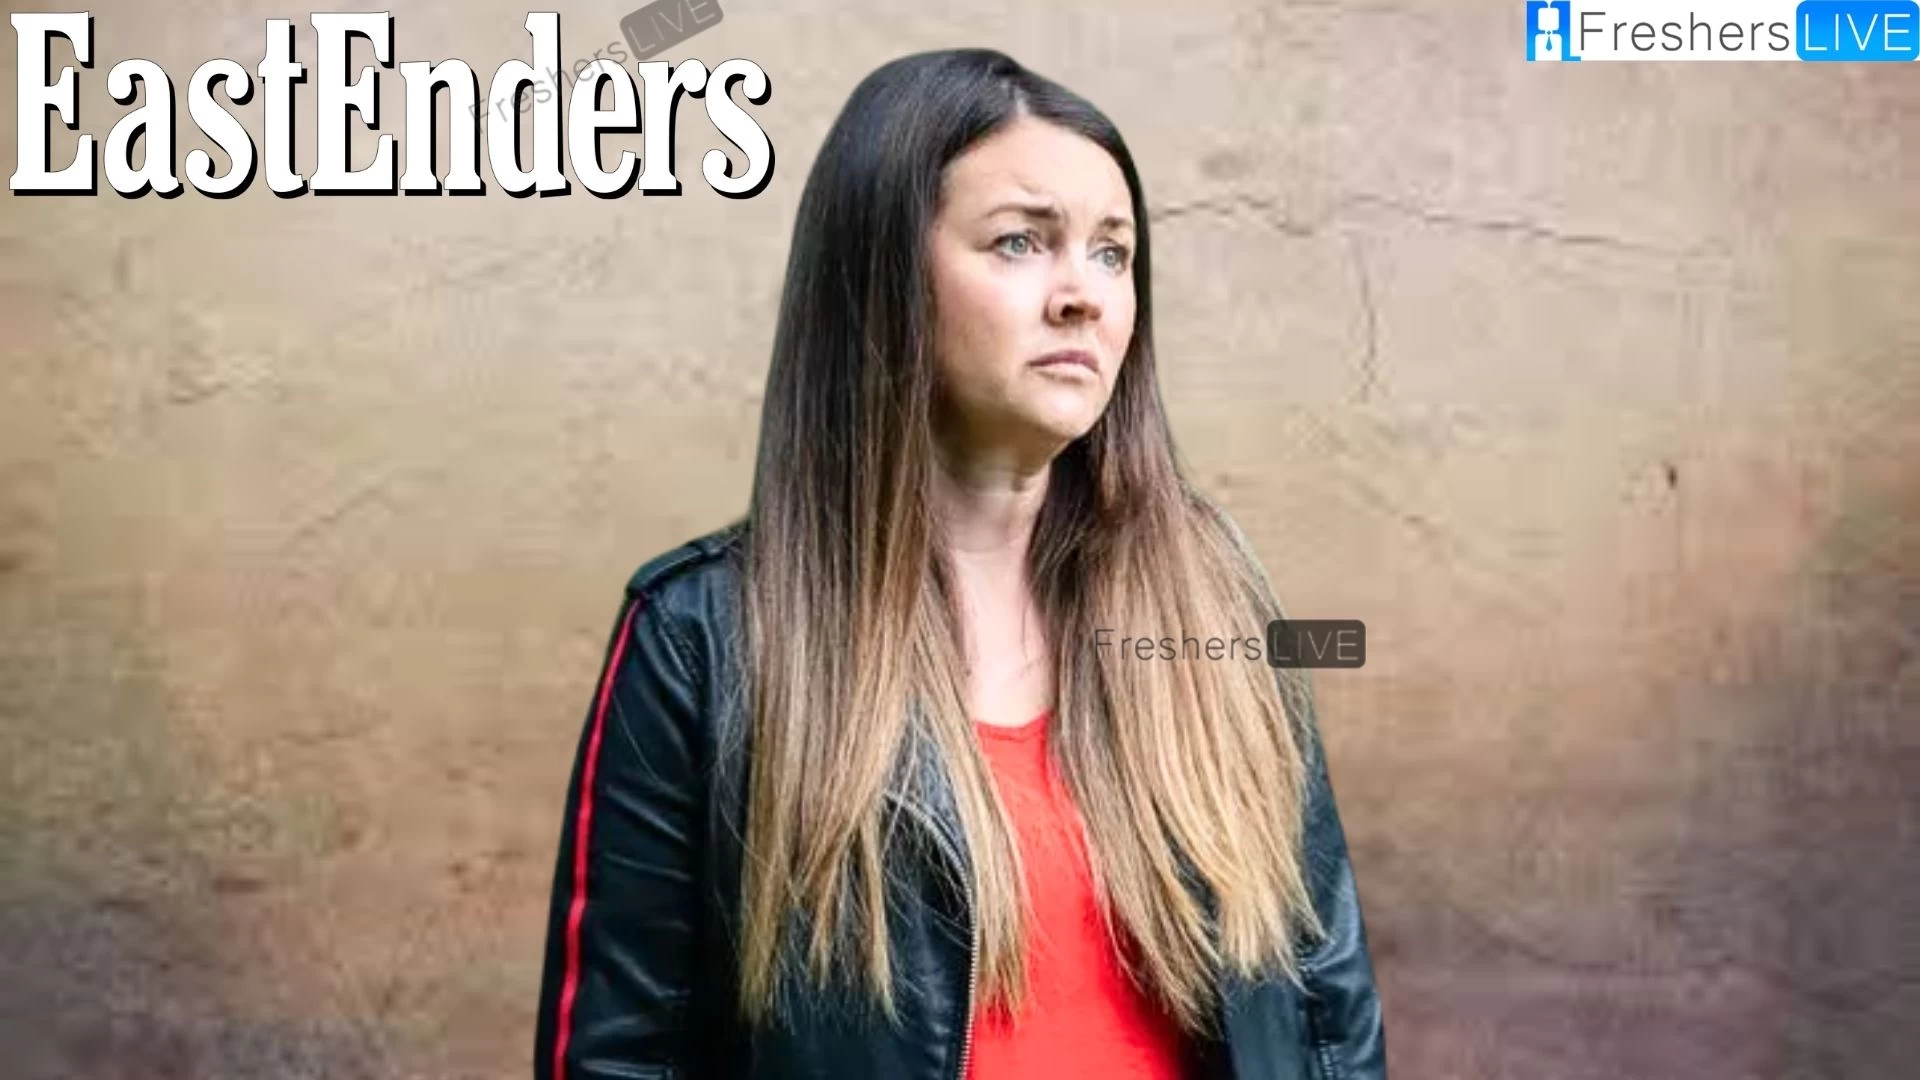 What Happened to Stacey in Eastenders? Who is Stacey in Eastenders?